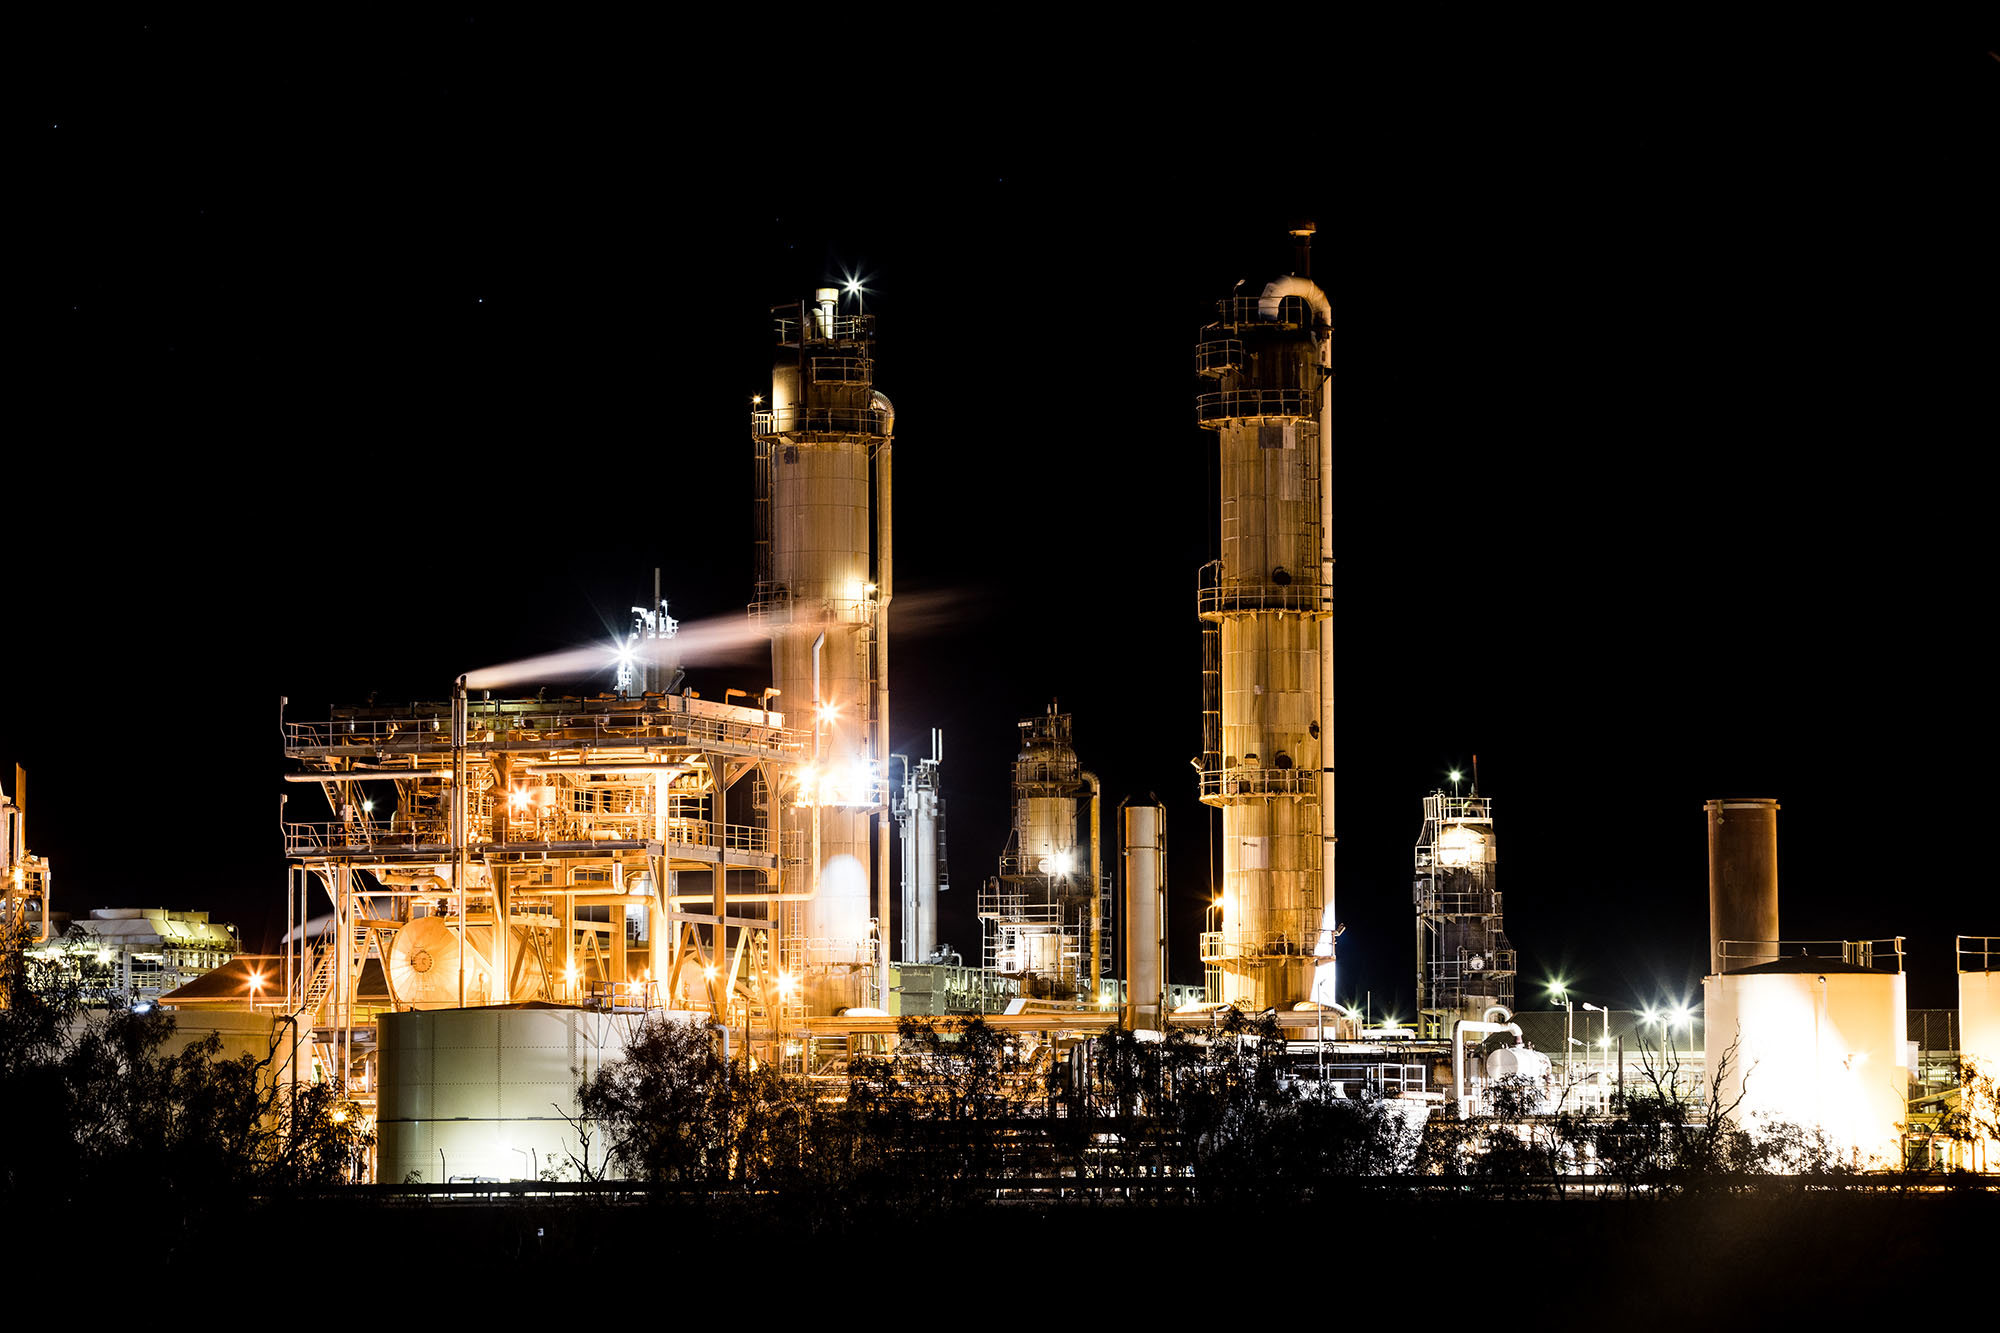 General views of the Santos Moomba gas plant.